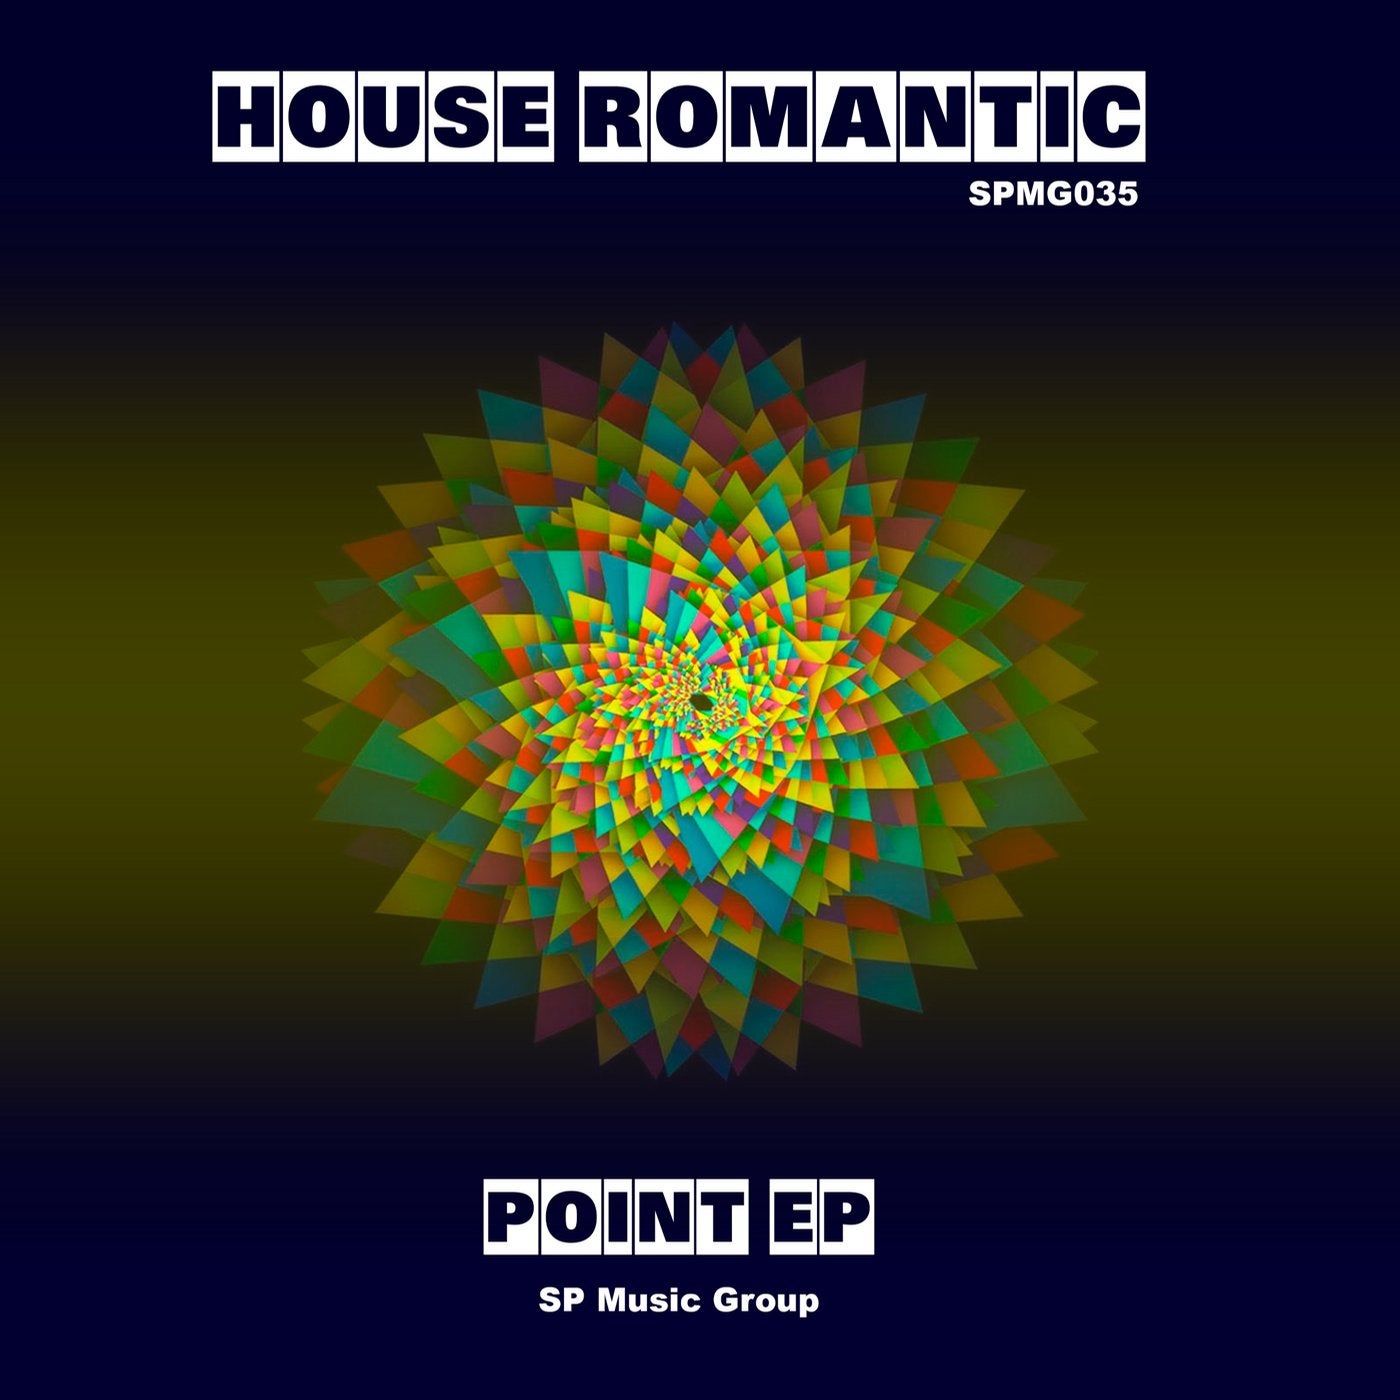 Point EP